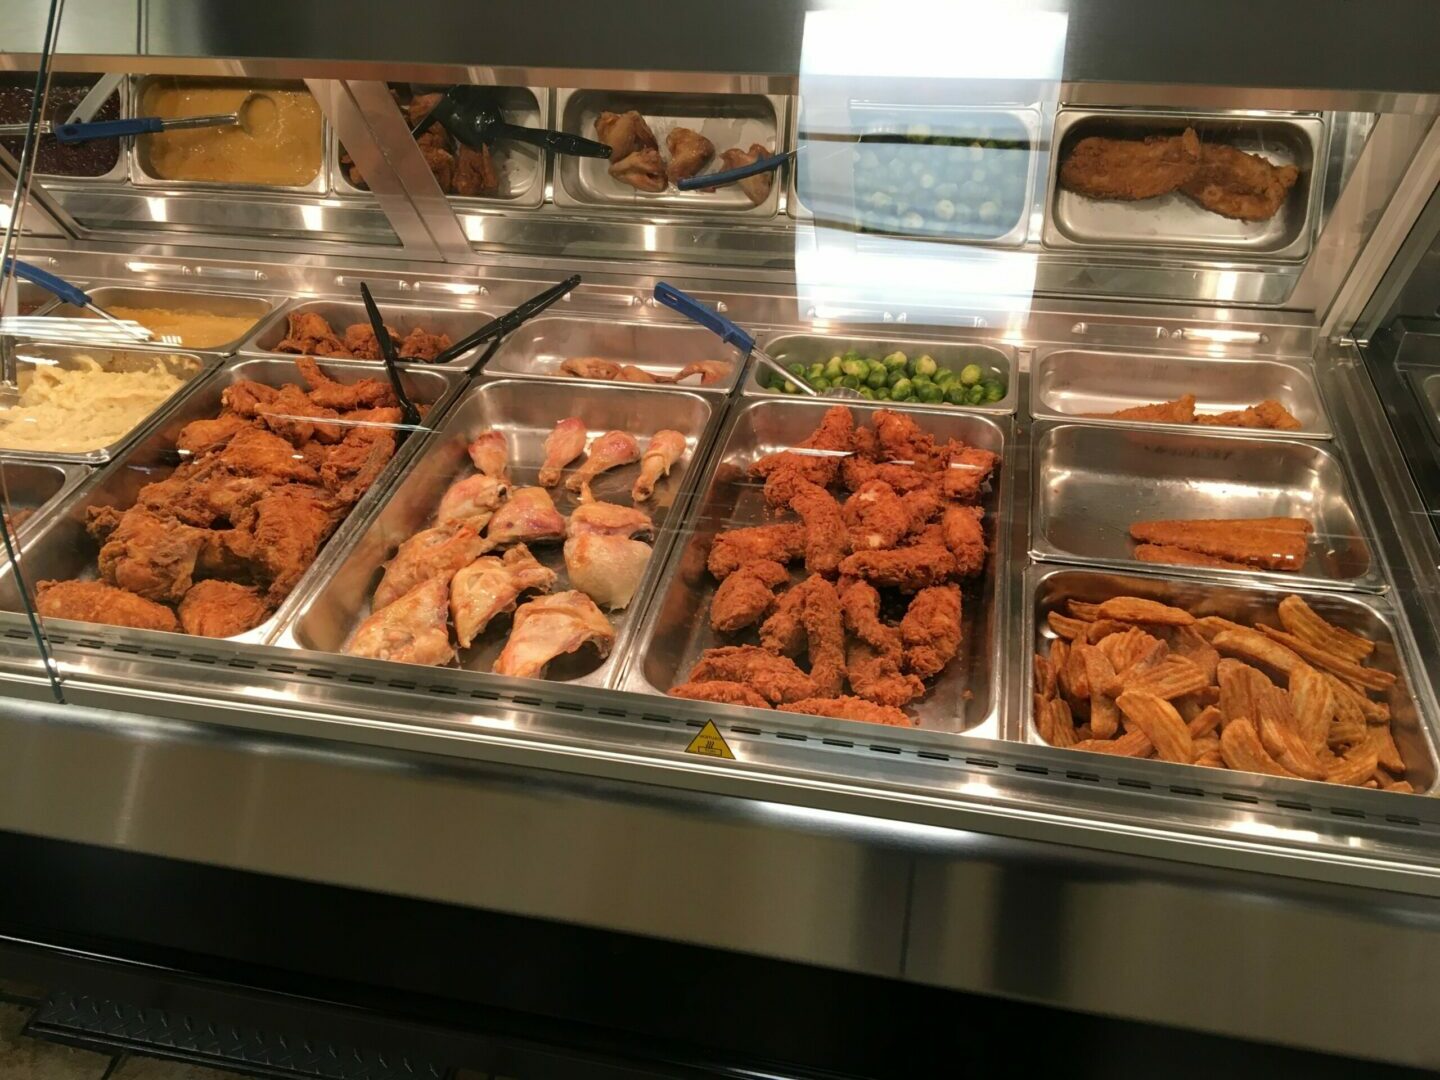 A Catering Food Trays on Display for Serving